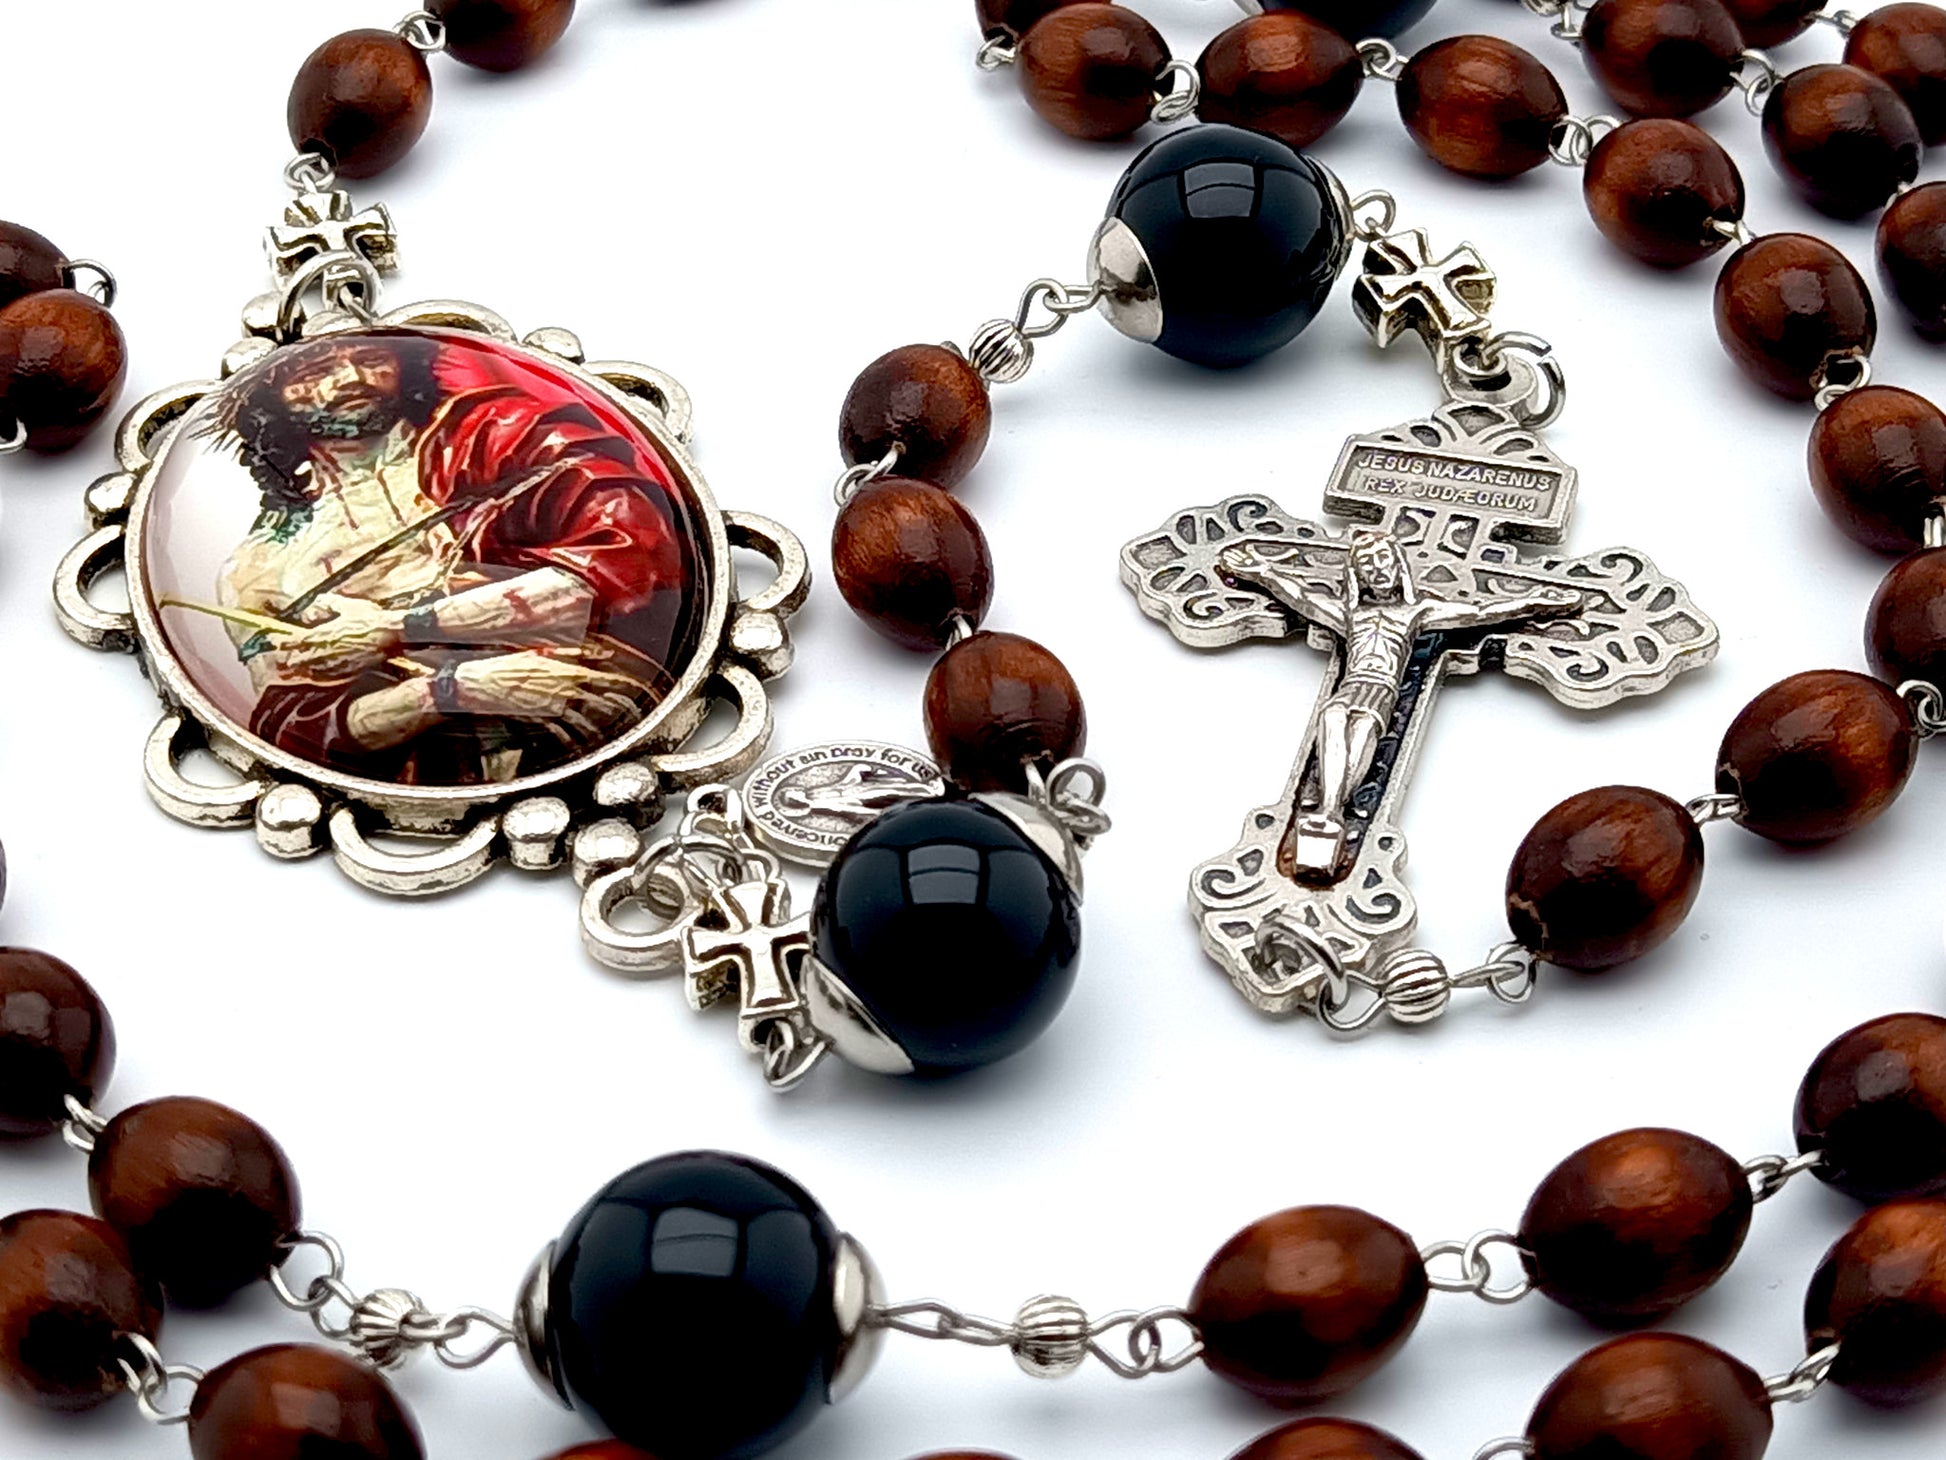 Passion of Christ circular unique rosary beads with wood and onyx beads, Passion picture centre medal and Pardon crucifix.